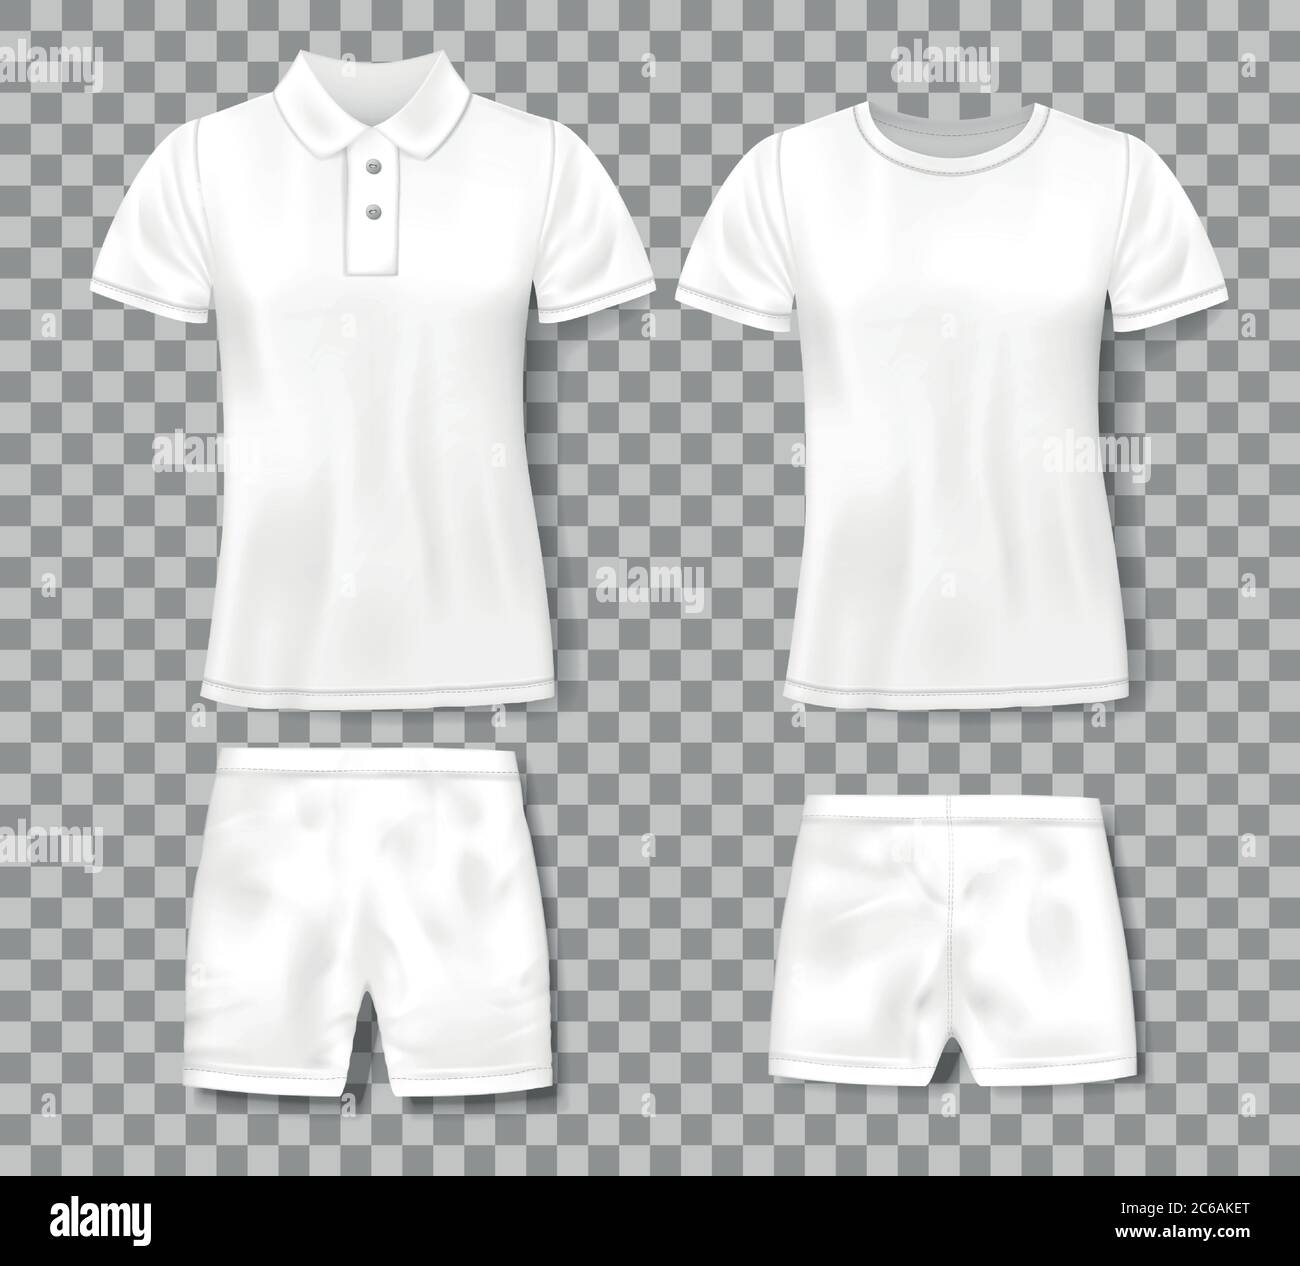 White realistic male polo shirt and sport shorts design template. Set of t-shirts, men classic polo mockup isolated. Vector illustration Stock Vector